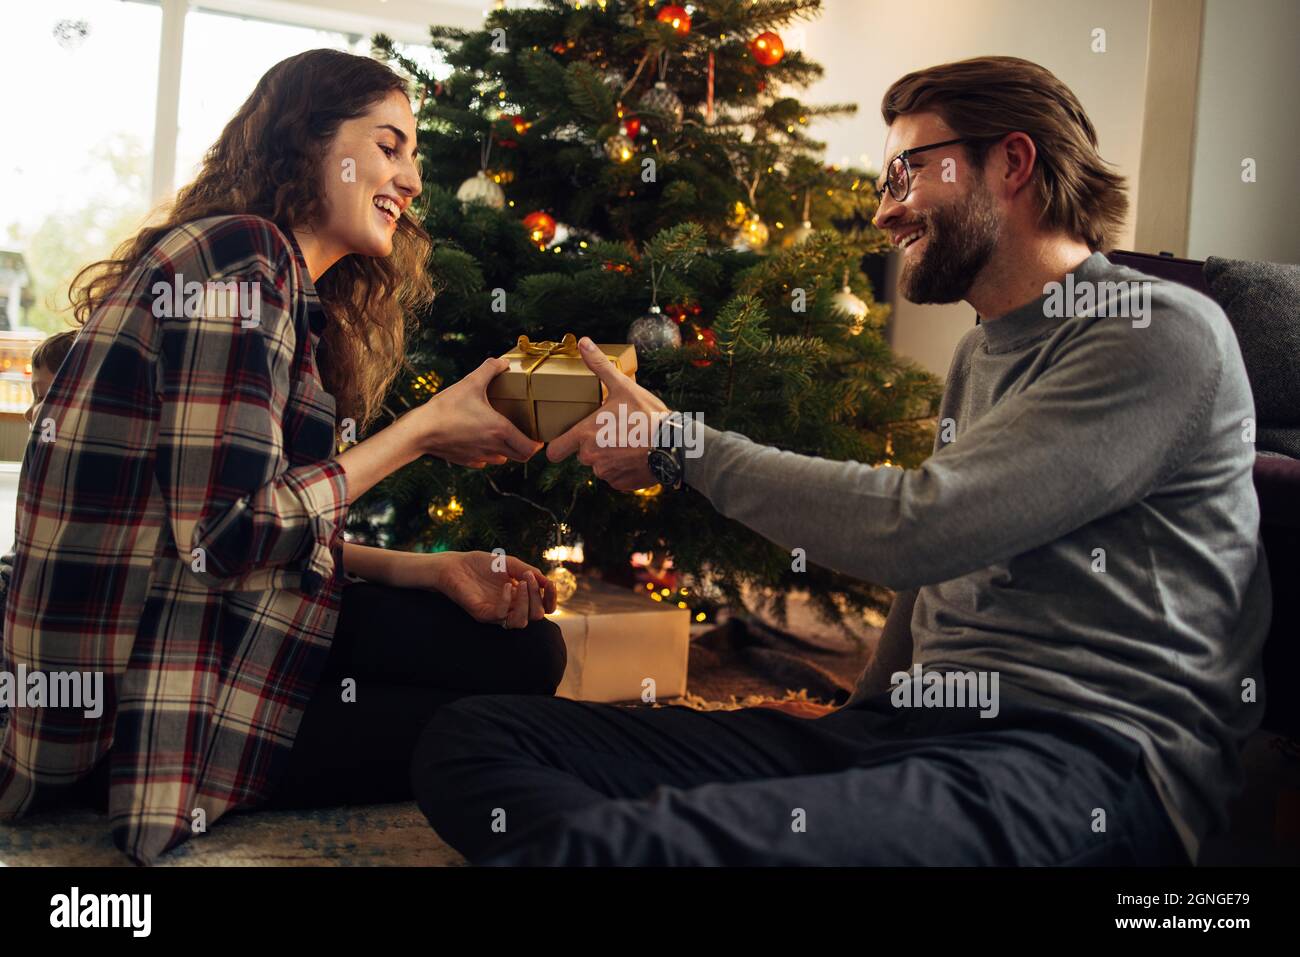 Man giving gift to his wife at home. Couple sitting by Christmas tree exchanging presents and smiling. Stock Photo